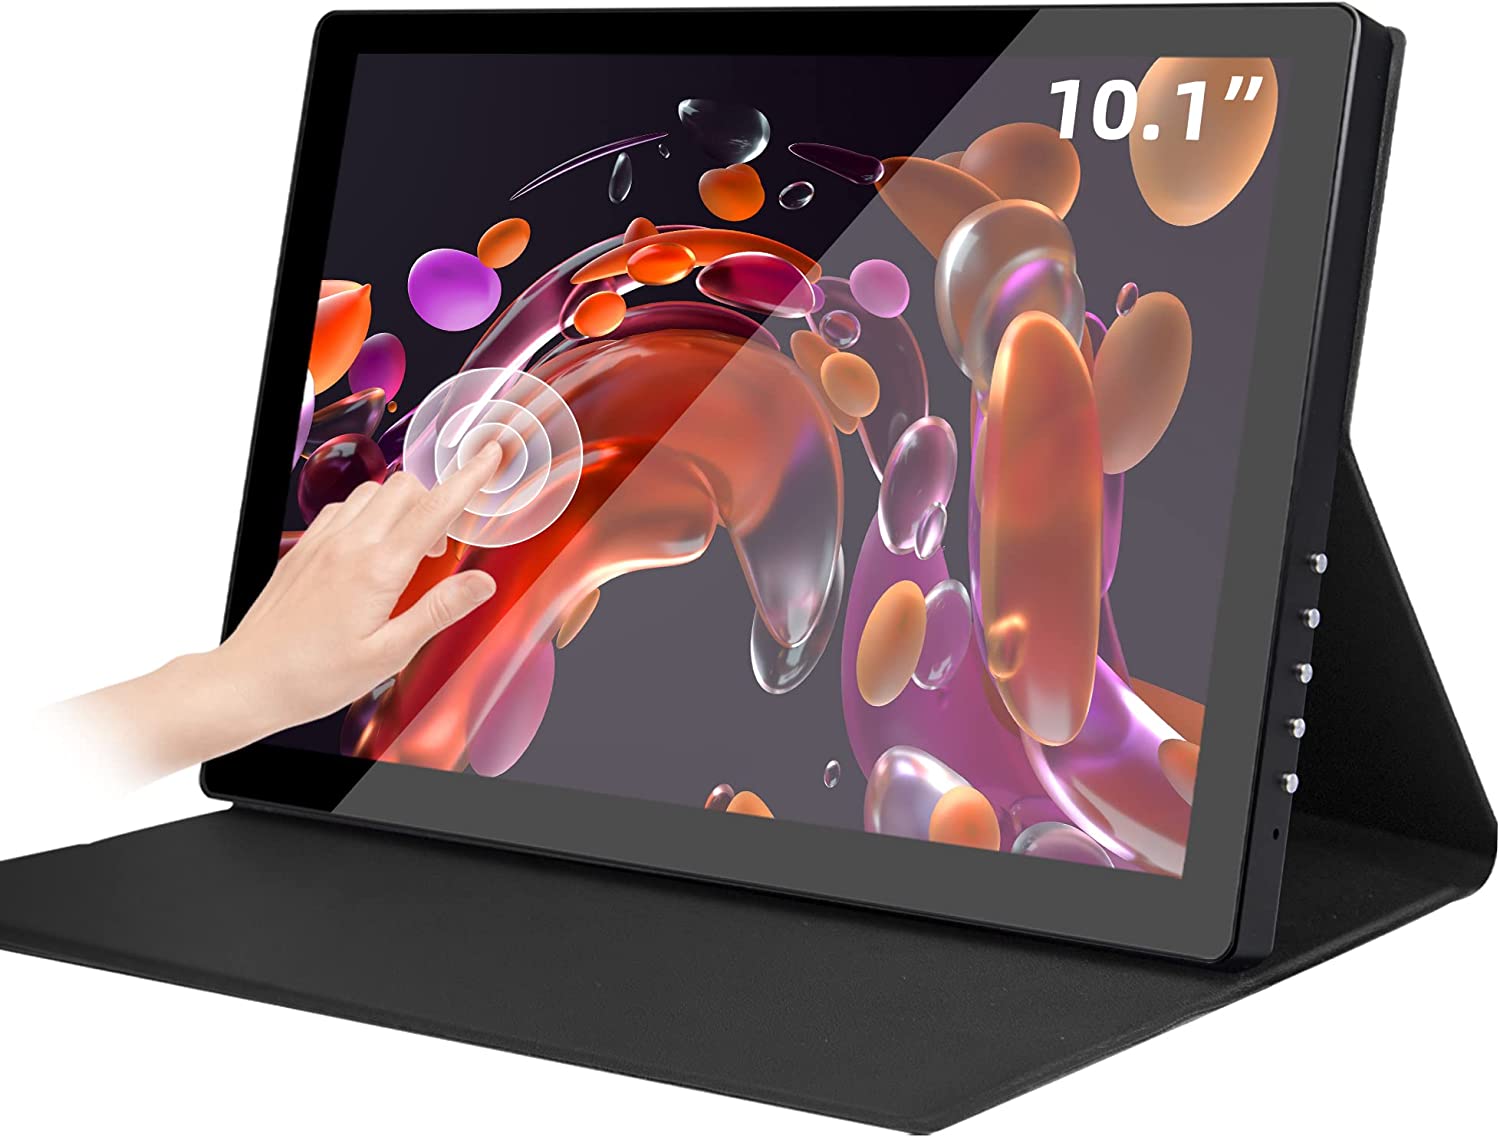 Thinlerain 10.1" Portable Touchscreen Monitor IPS FHD 1920x1200 HDMI 16:10 for Notebook